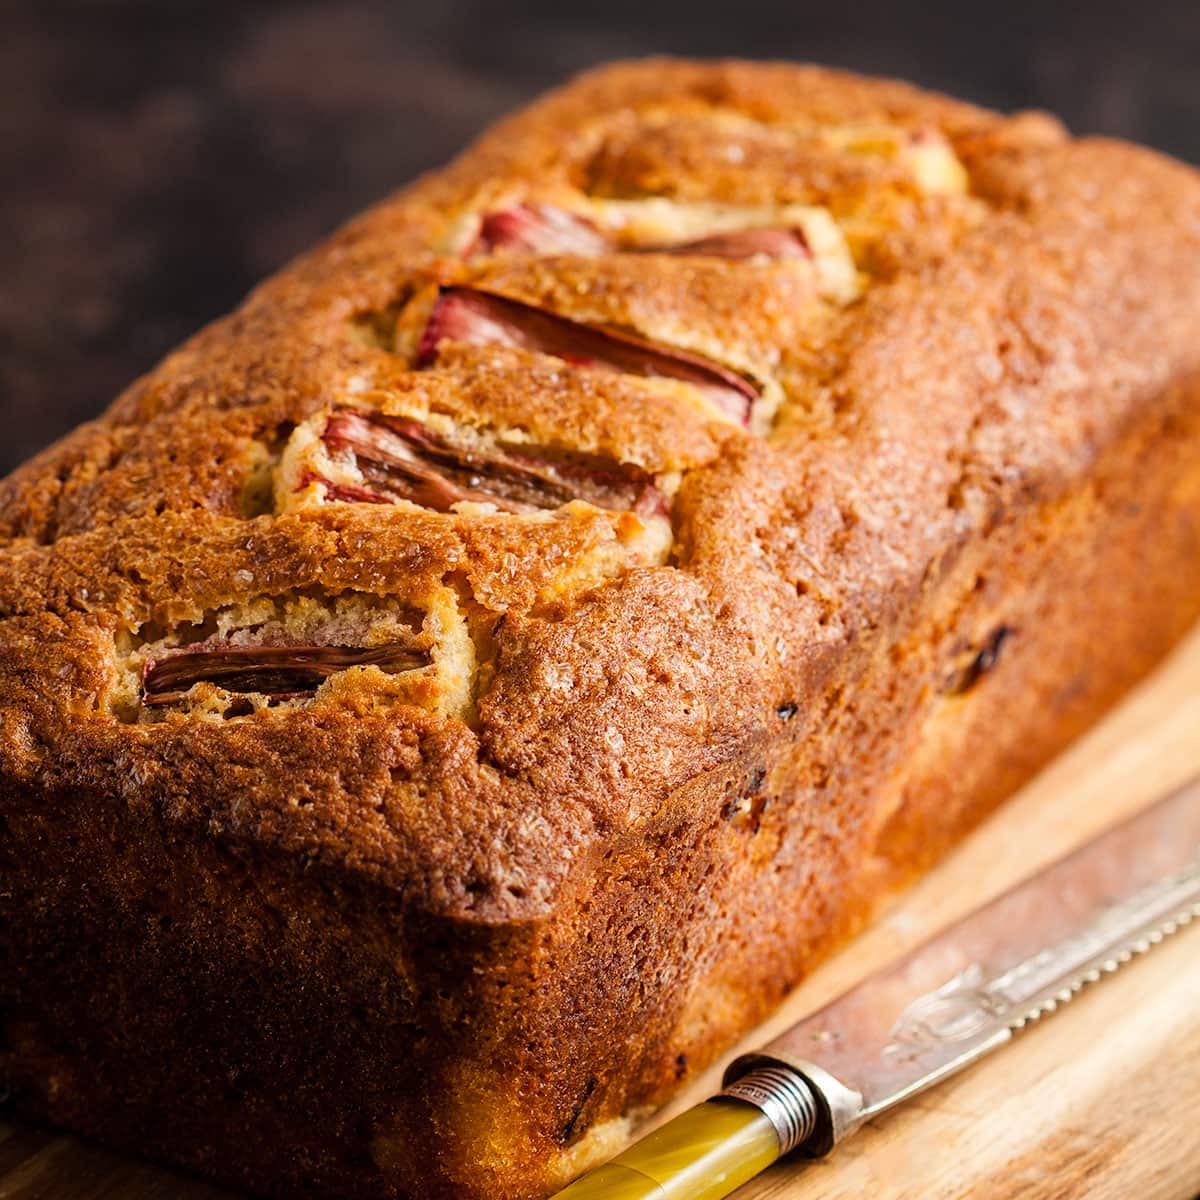 rhubarb and ginger loaf cake on a wooden board.